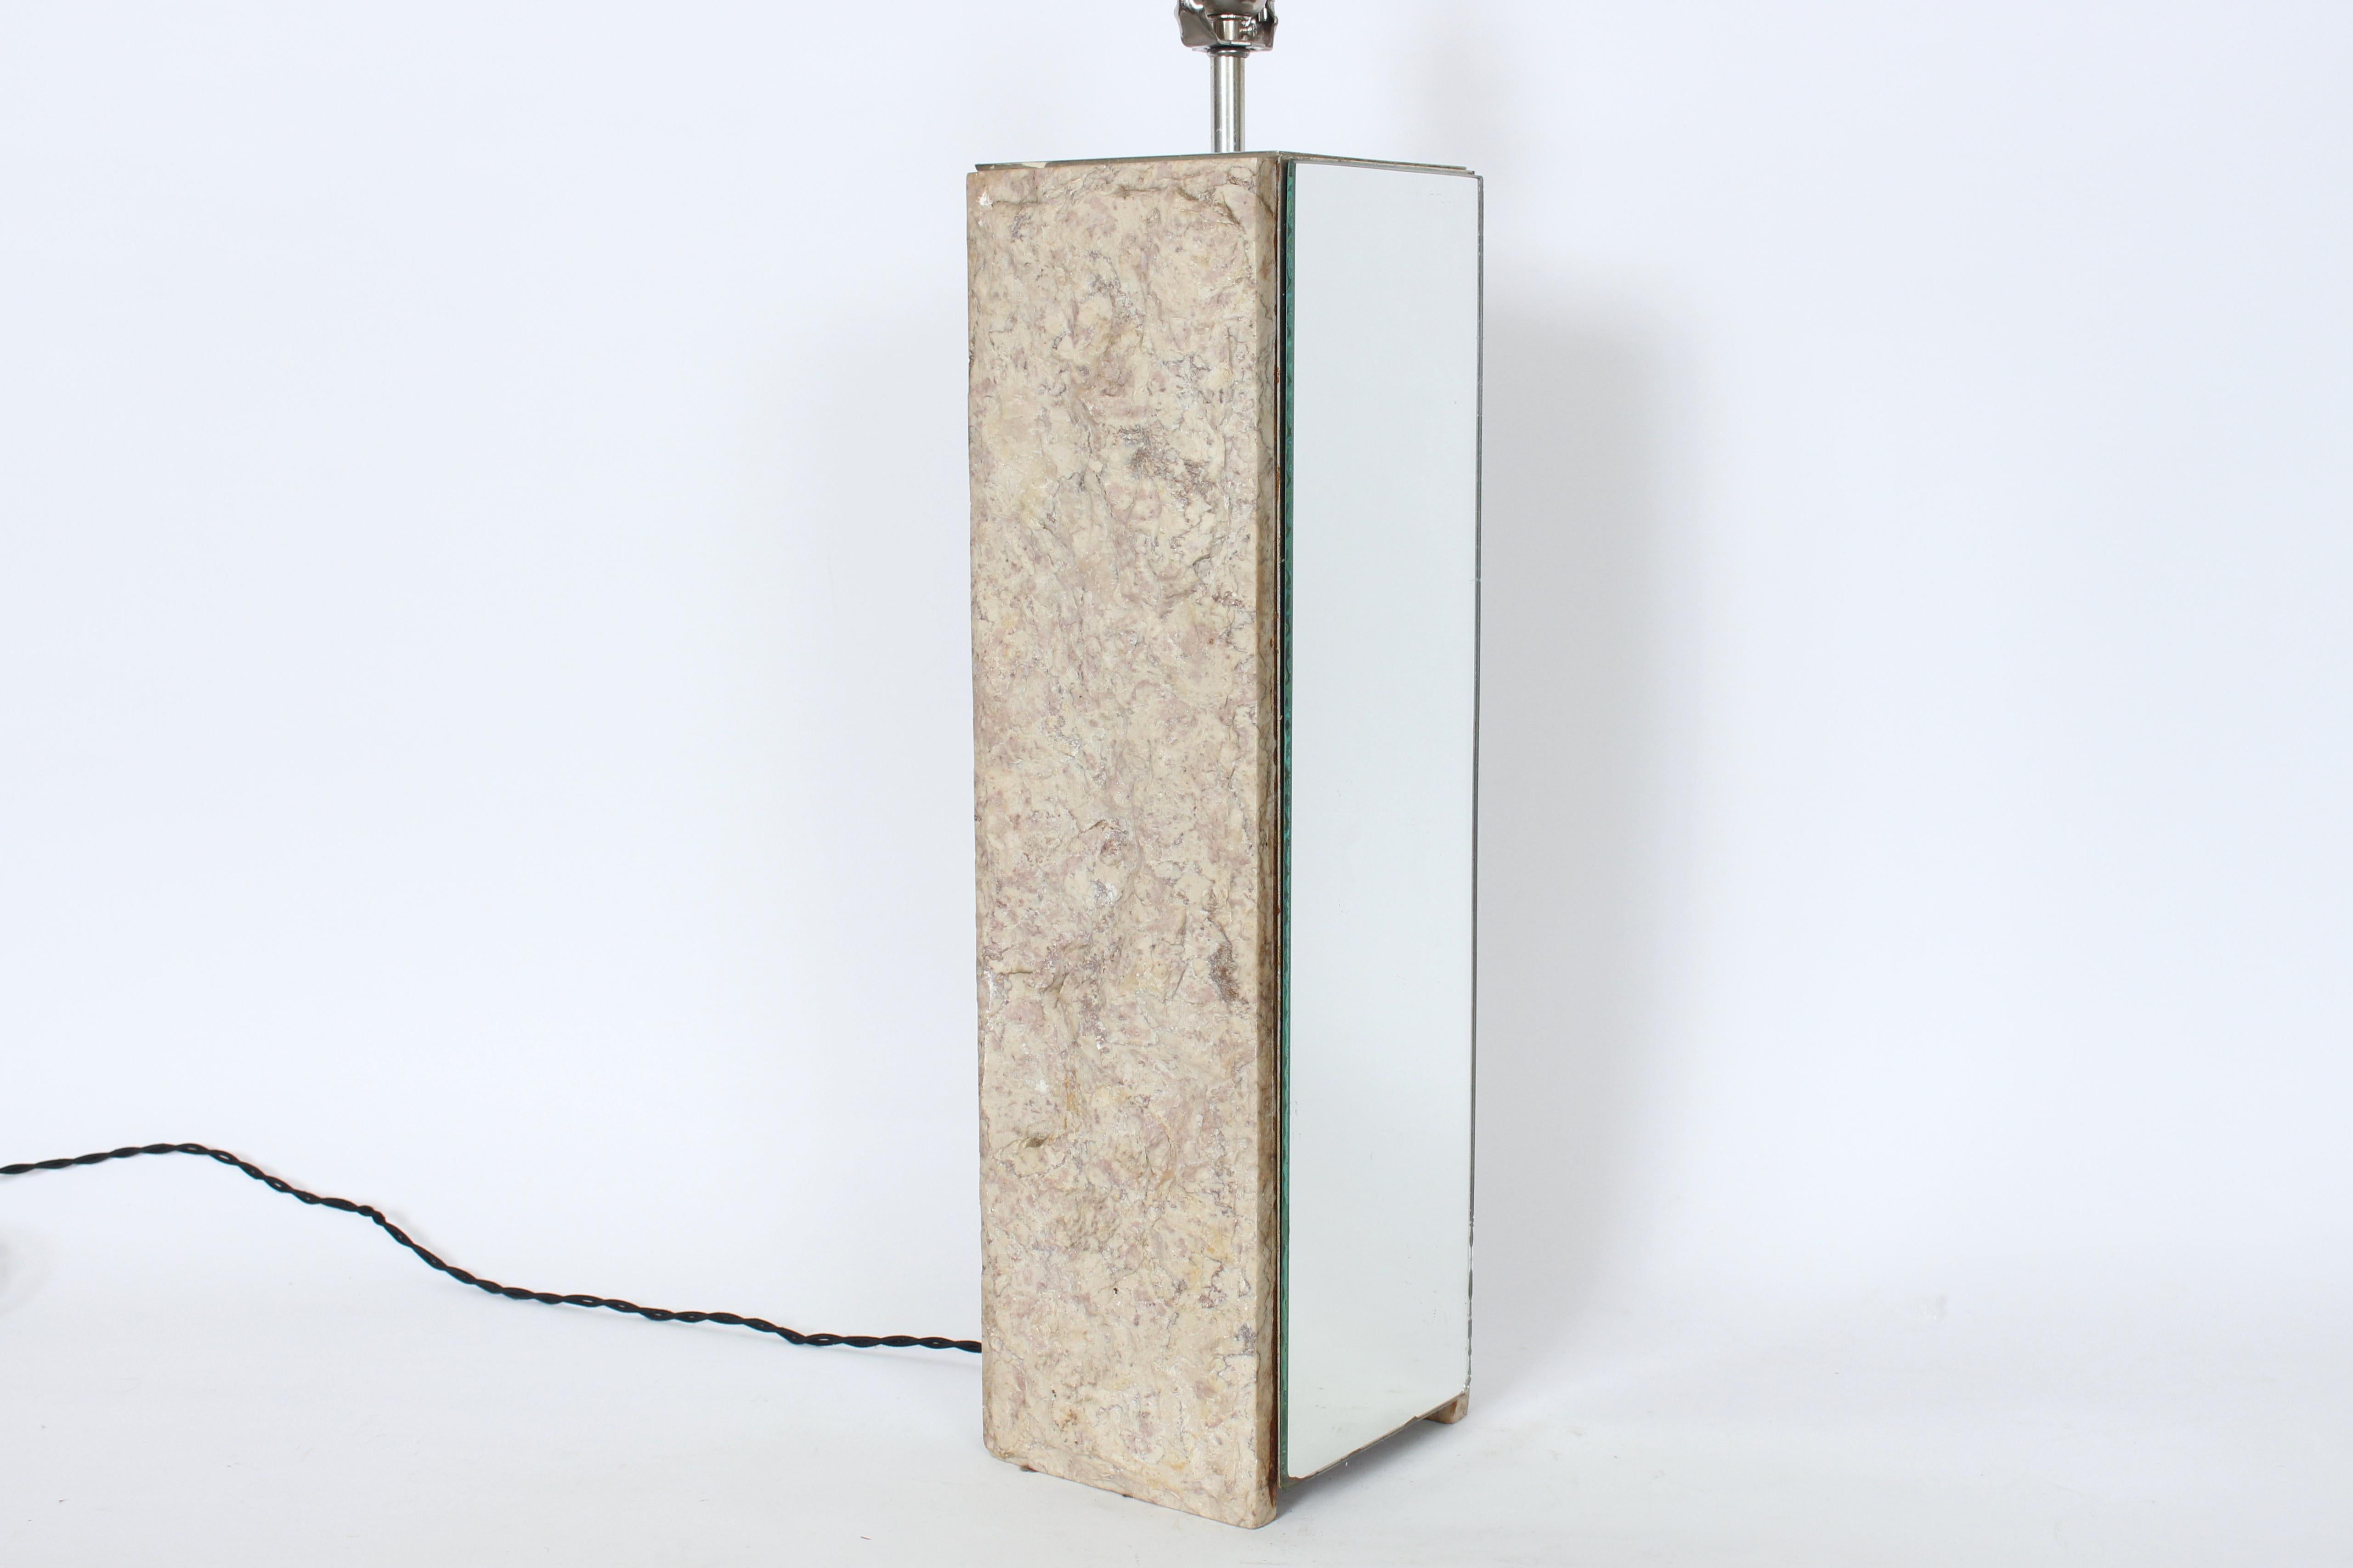 Substantial Laurel Lamp Co. Travertine and Mirror Table Lamp, 1960s For Sale 3